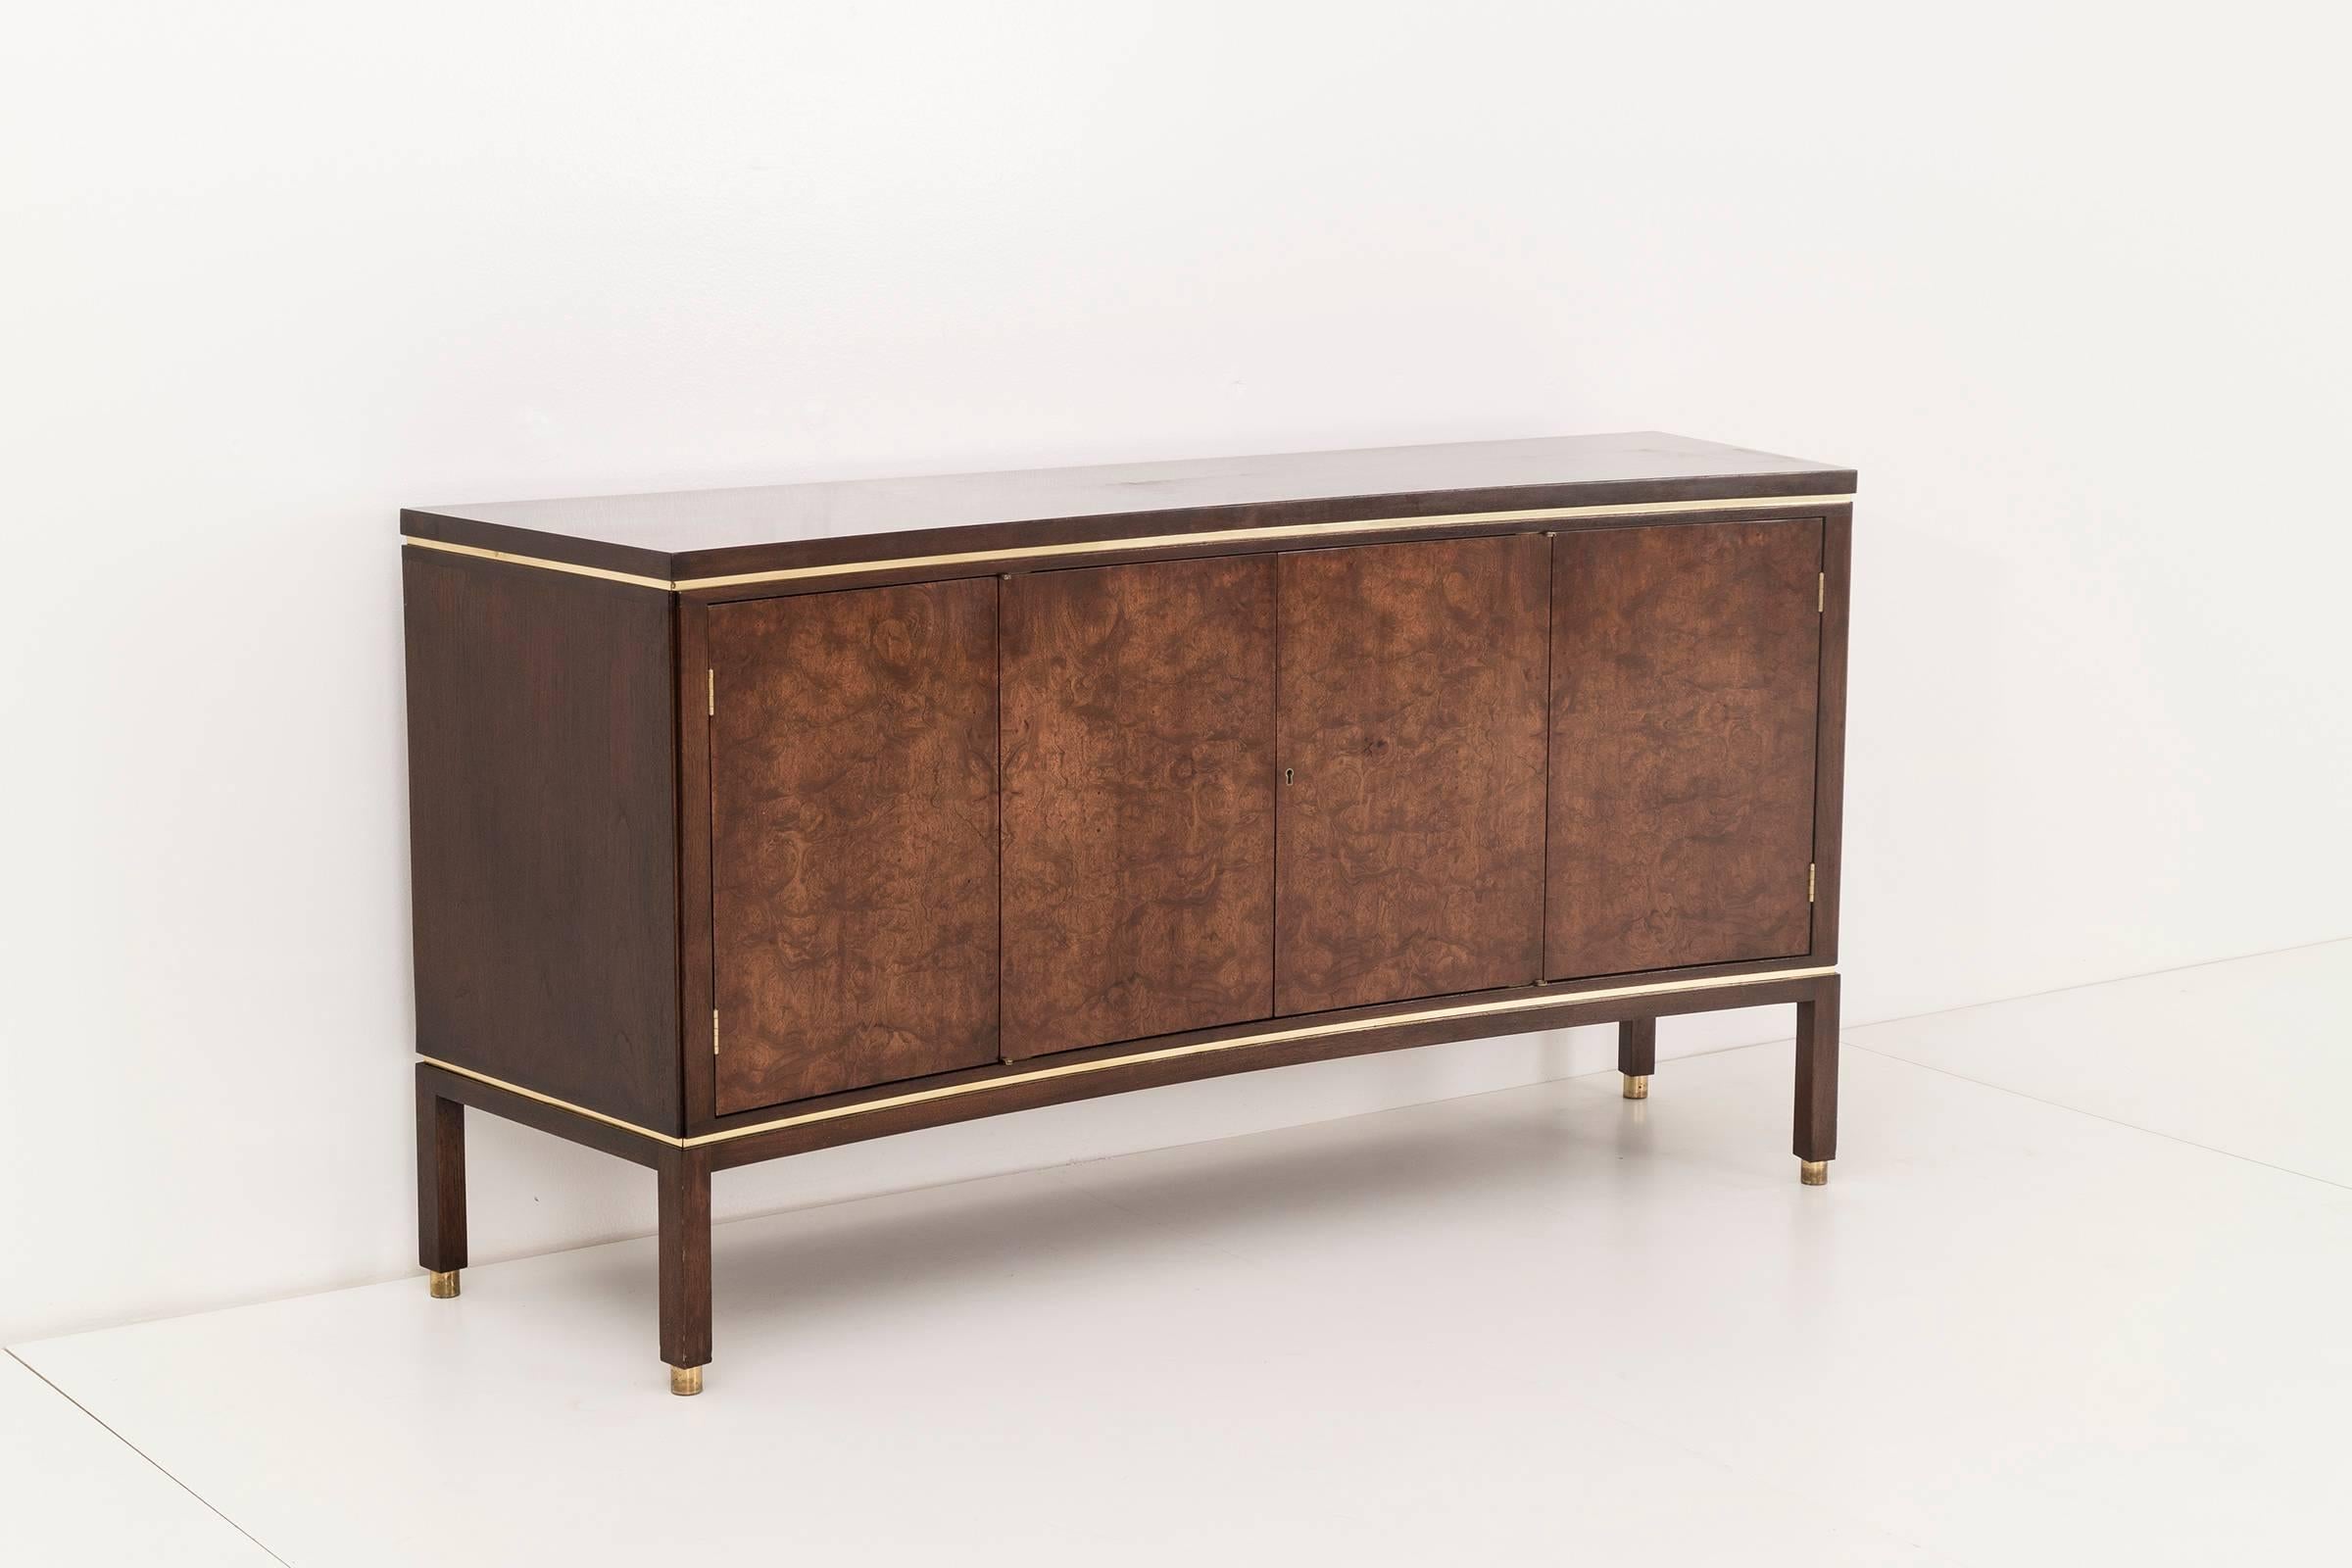 Edward Wormley for Dunbar. This curved-front cabinet is constructed from burled maple doors on a walnut case with brass trim detail and brass feet. The minimal curved front is free of pulls and instead comes with Dunbar "D" Key. The